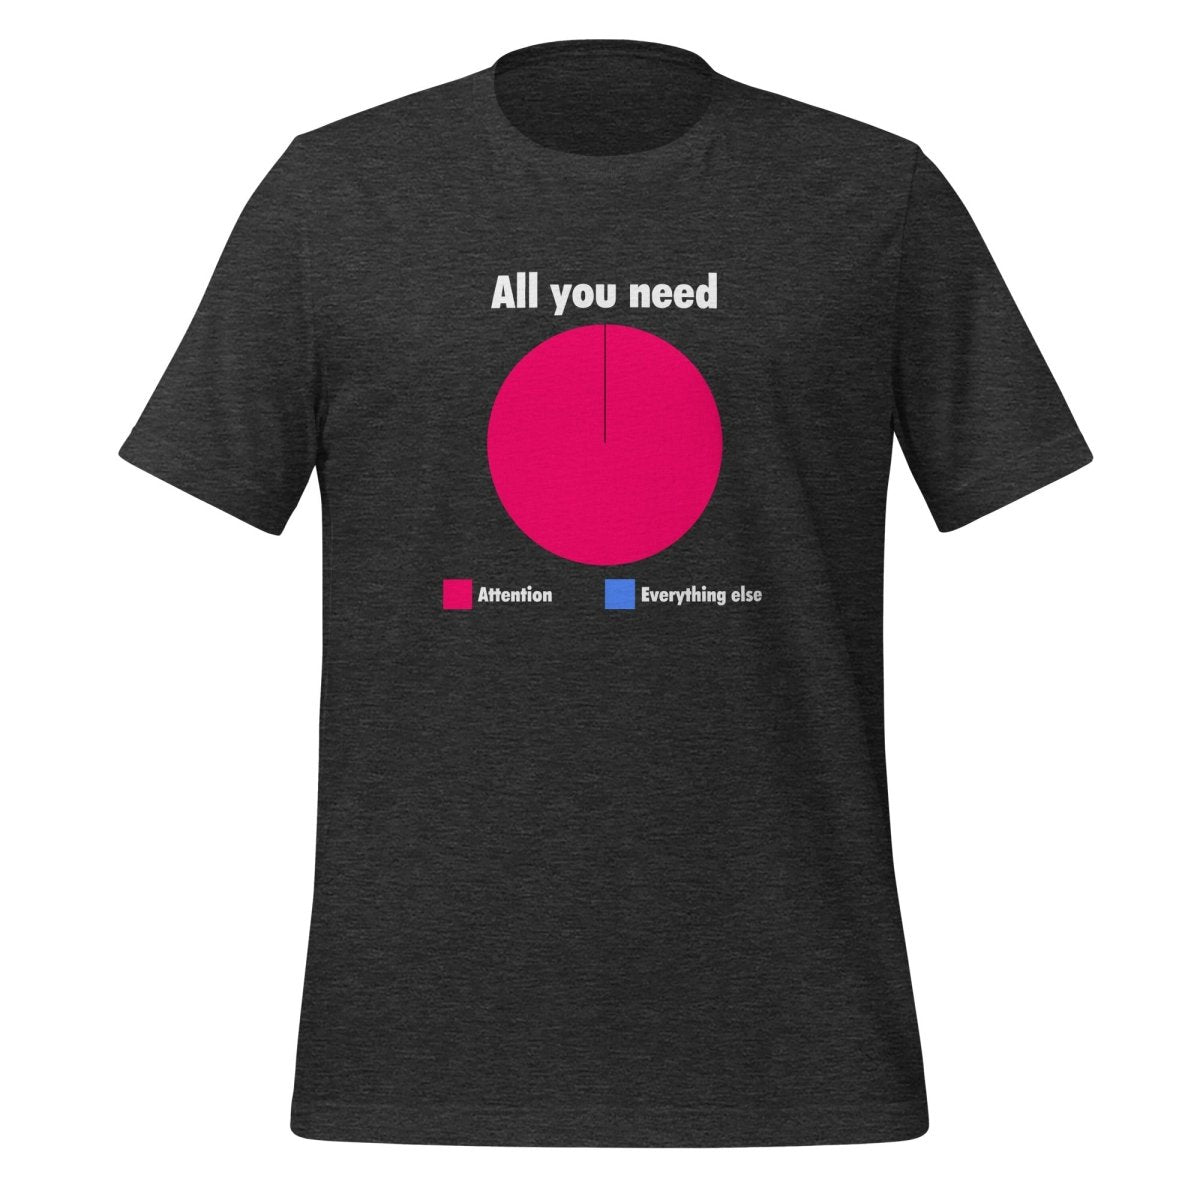 All You Need is Attention Pie Chart T - Shirt (unisex) - Dark Grey Heather - AI Store